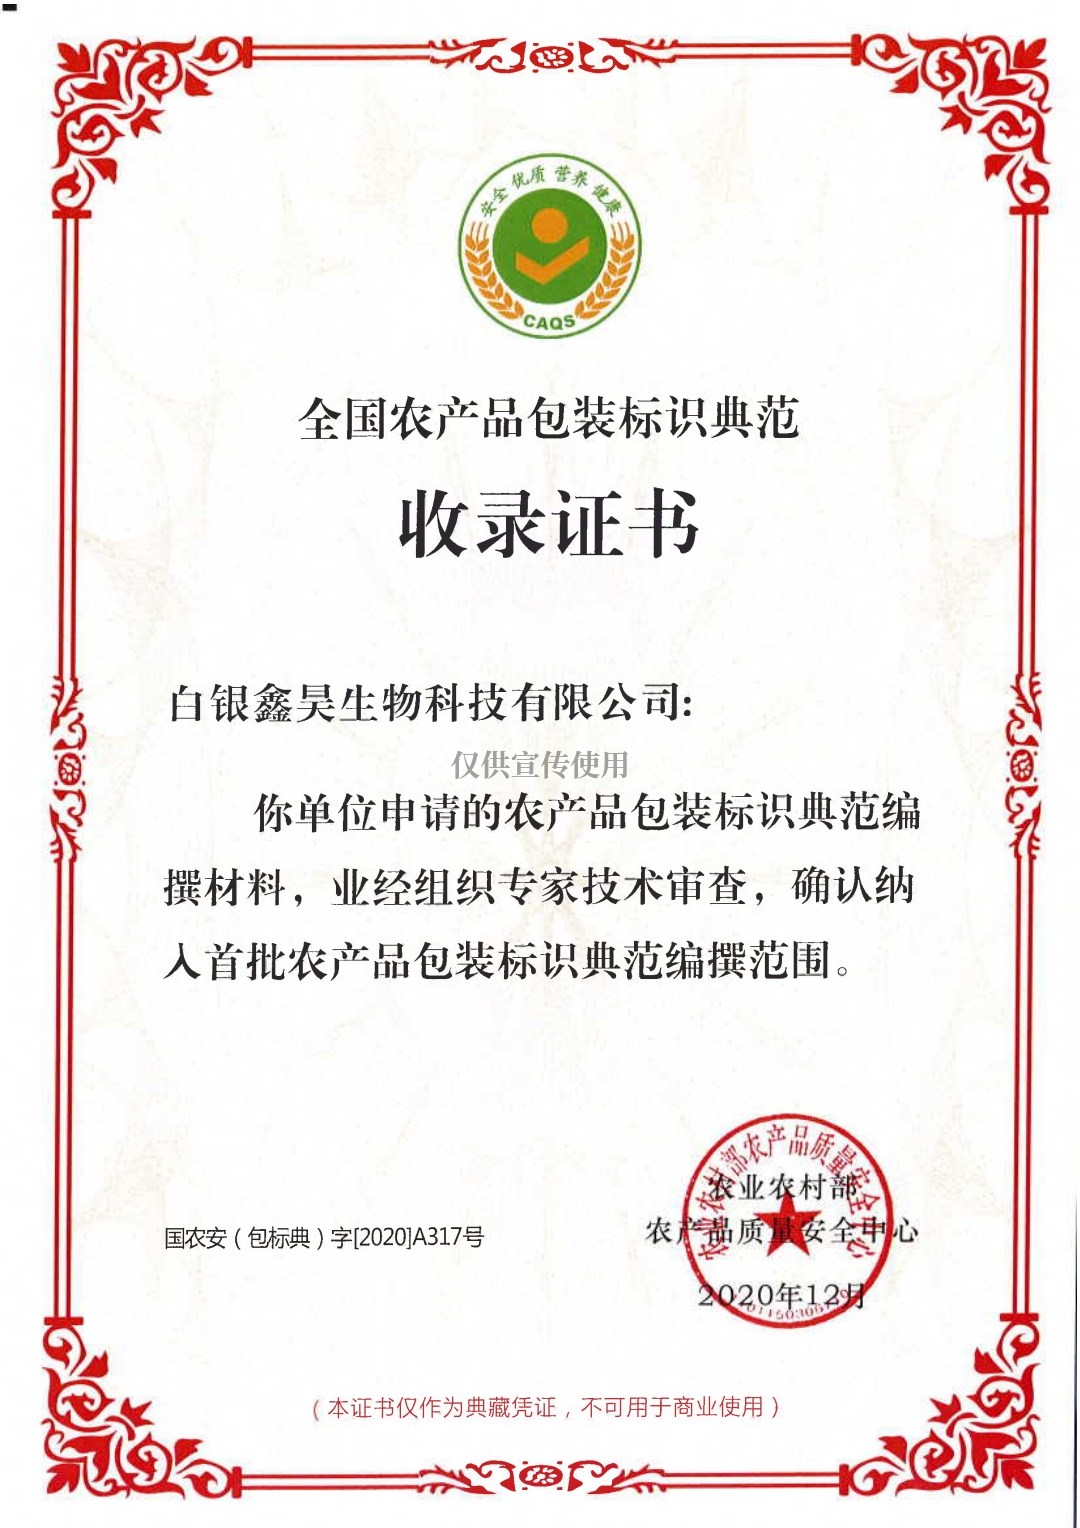 National Agricultural Product Packaging Marking Model Collection Certificate